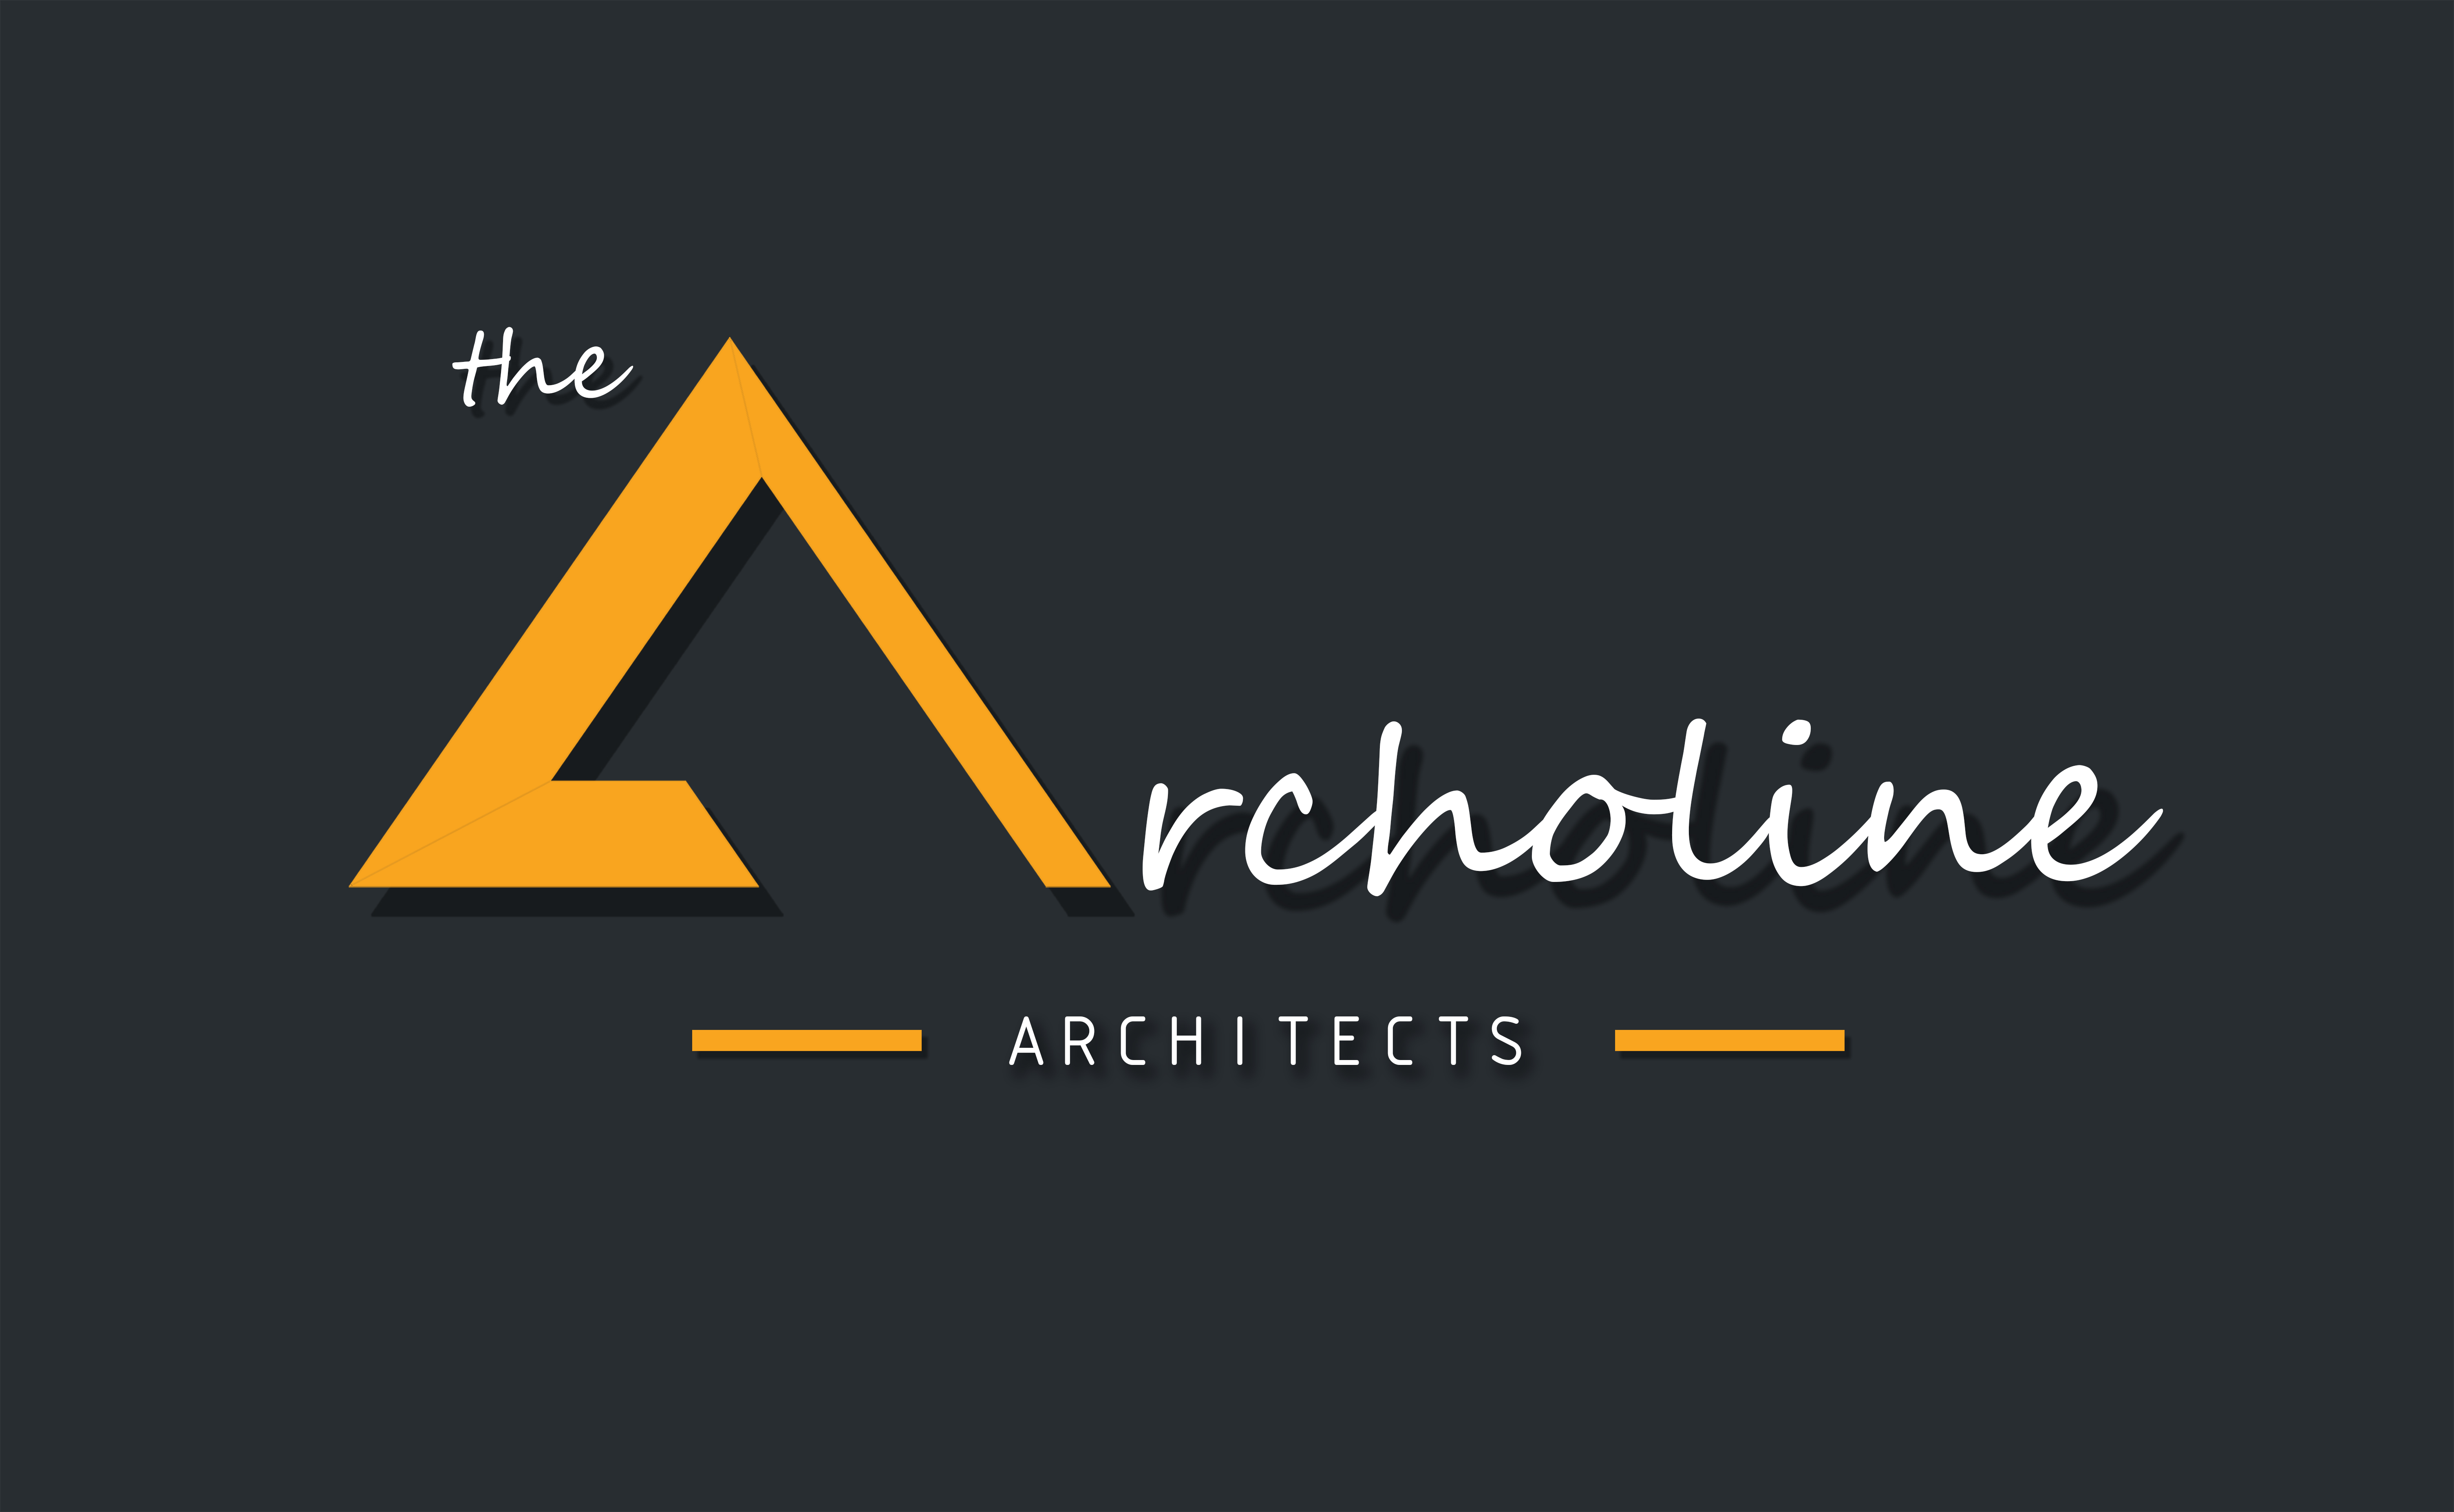 The Archoline Architects|Legal Services|Professional Services